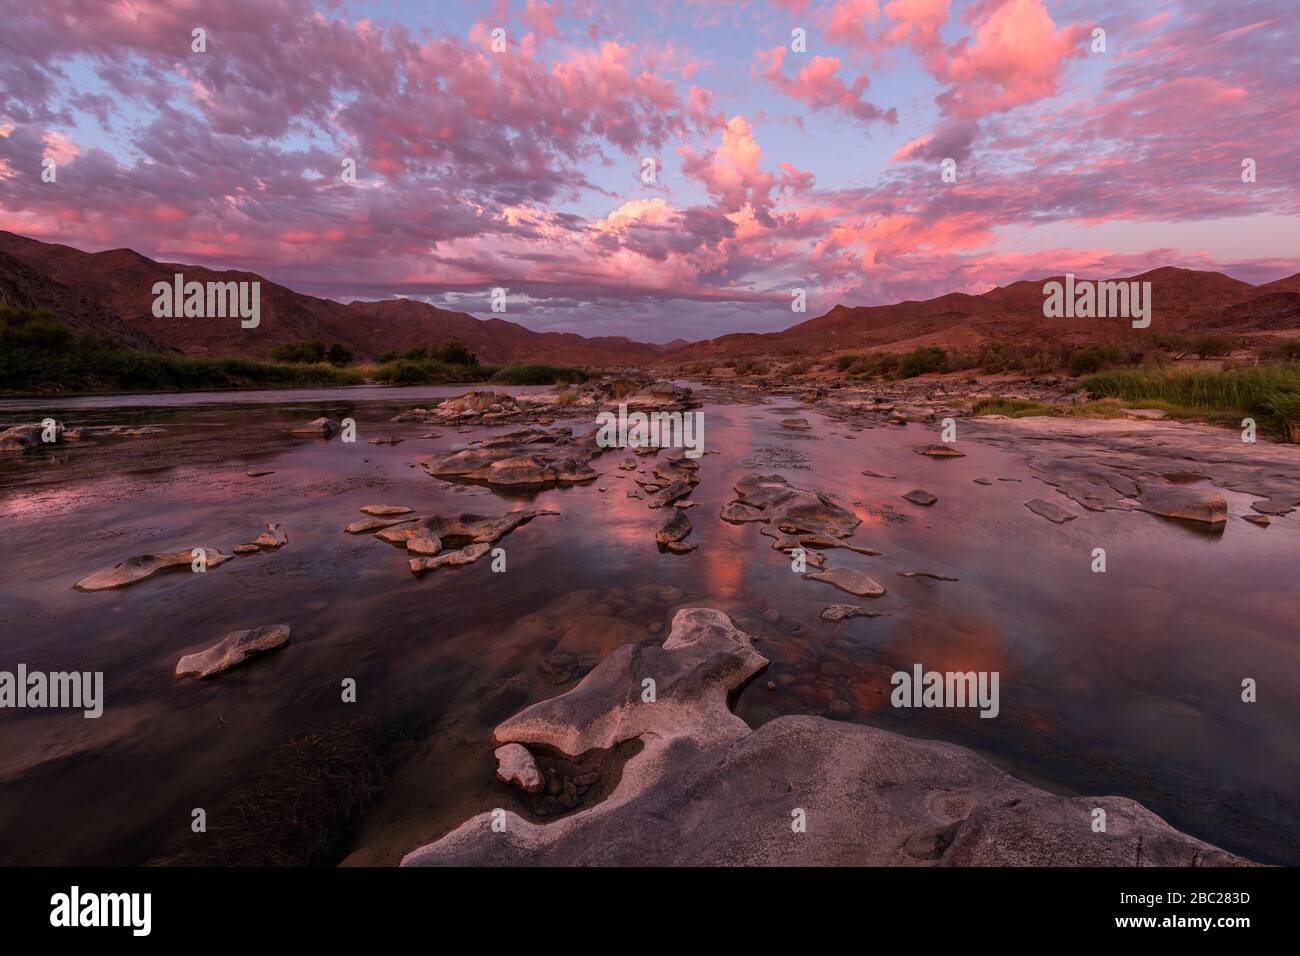 A beautiful landscape taken after sunset with mountains and the Orange River, with dramatic pink clouds reflecting in the water’s surface, taken in th Stock Photo